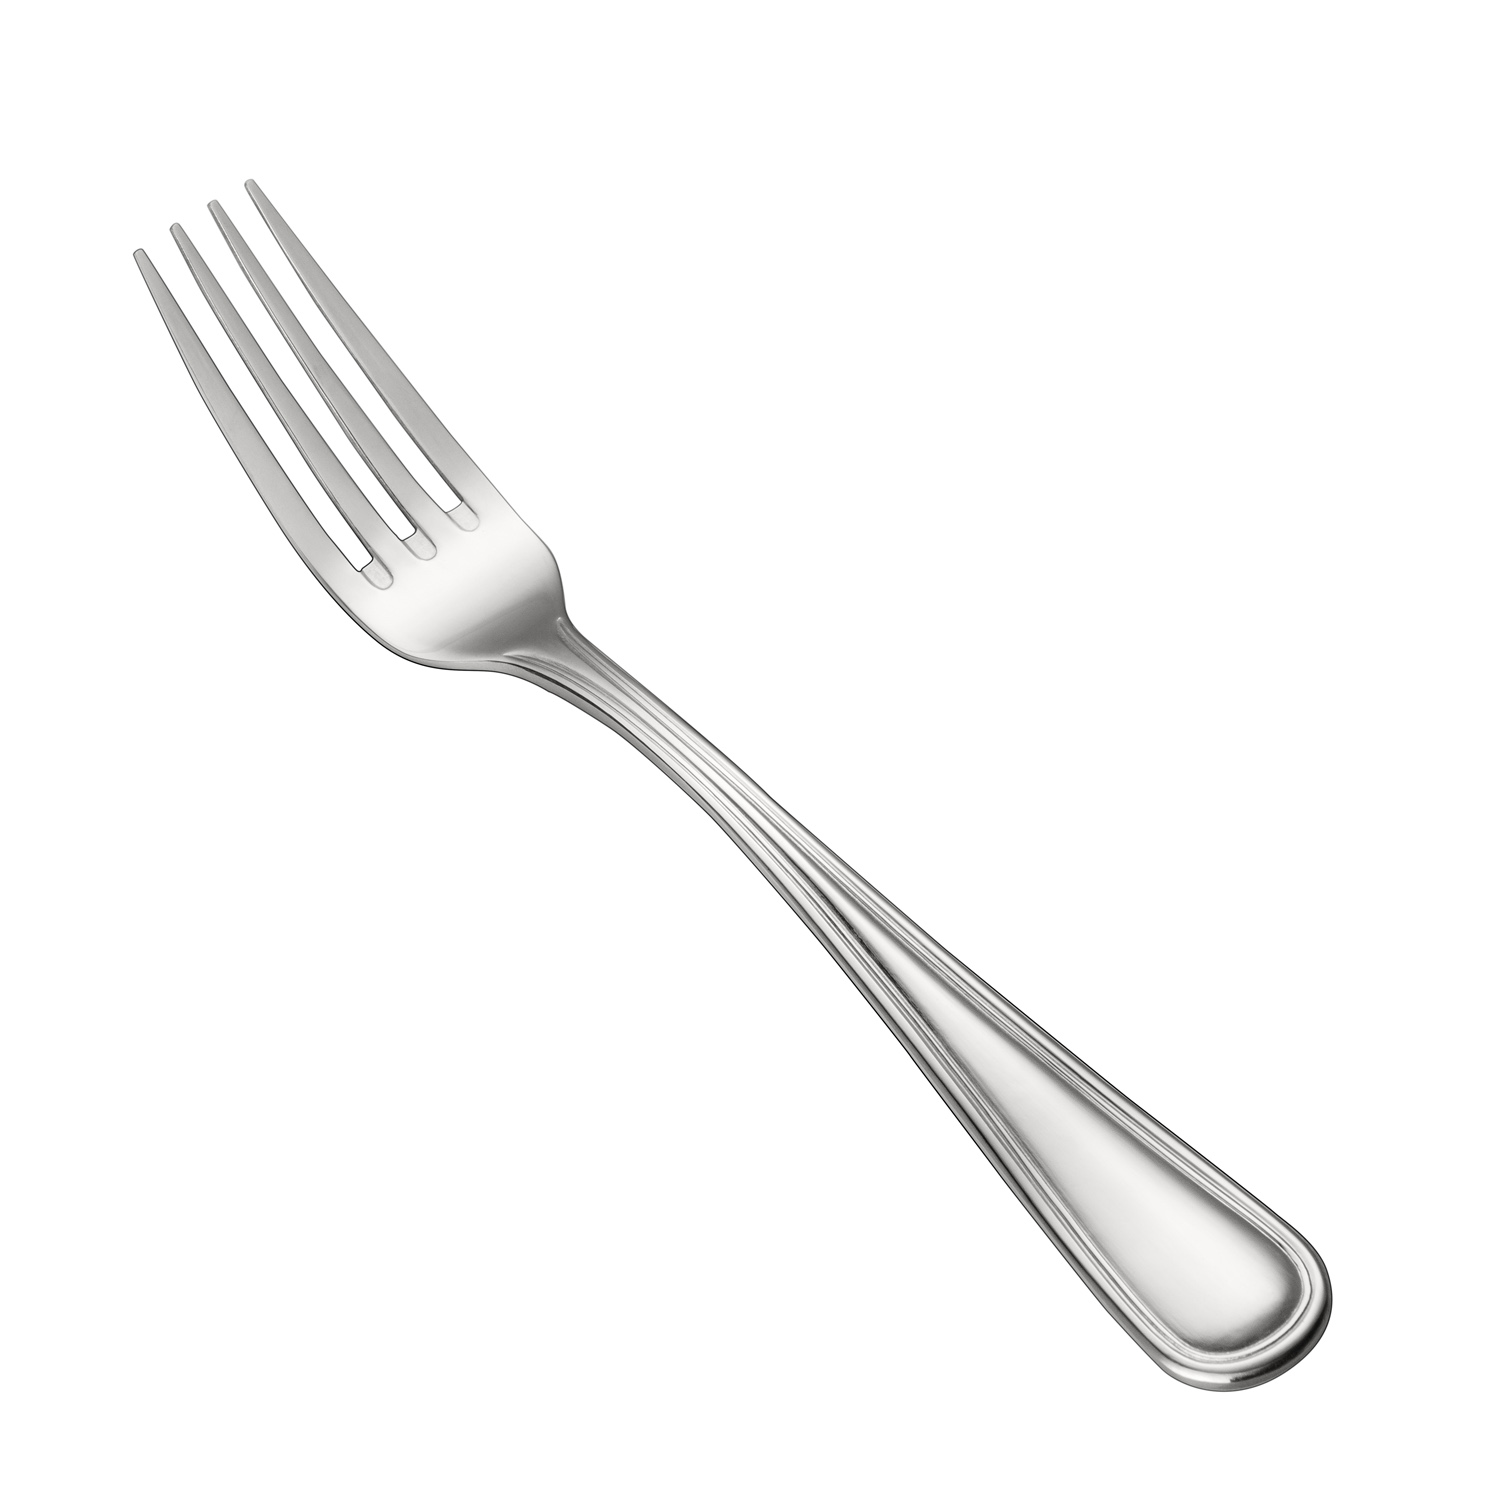 CAC China 3002-11 Prime Table Fork, Extra Heavyweight 18/0, 8"